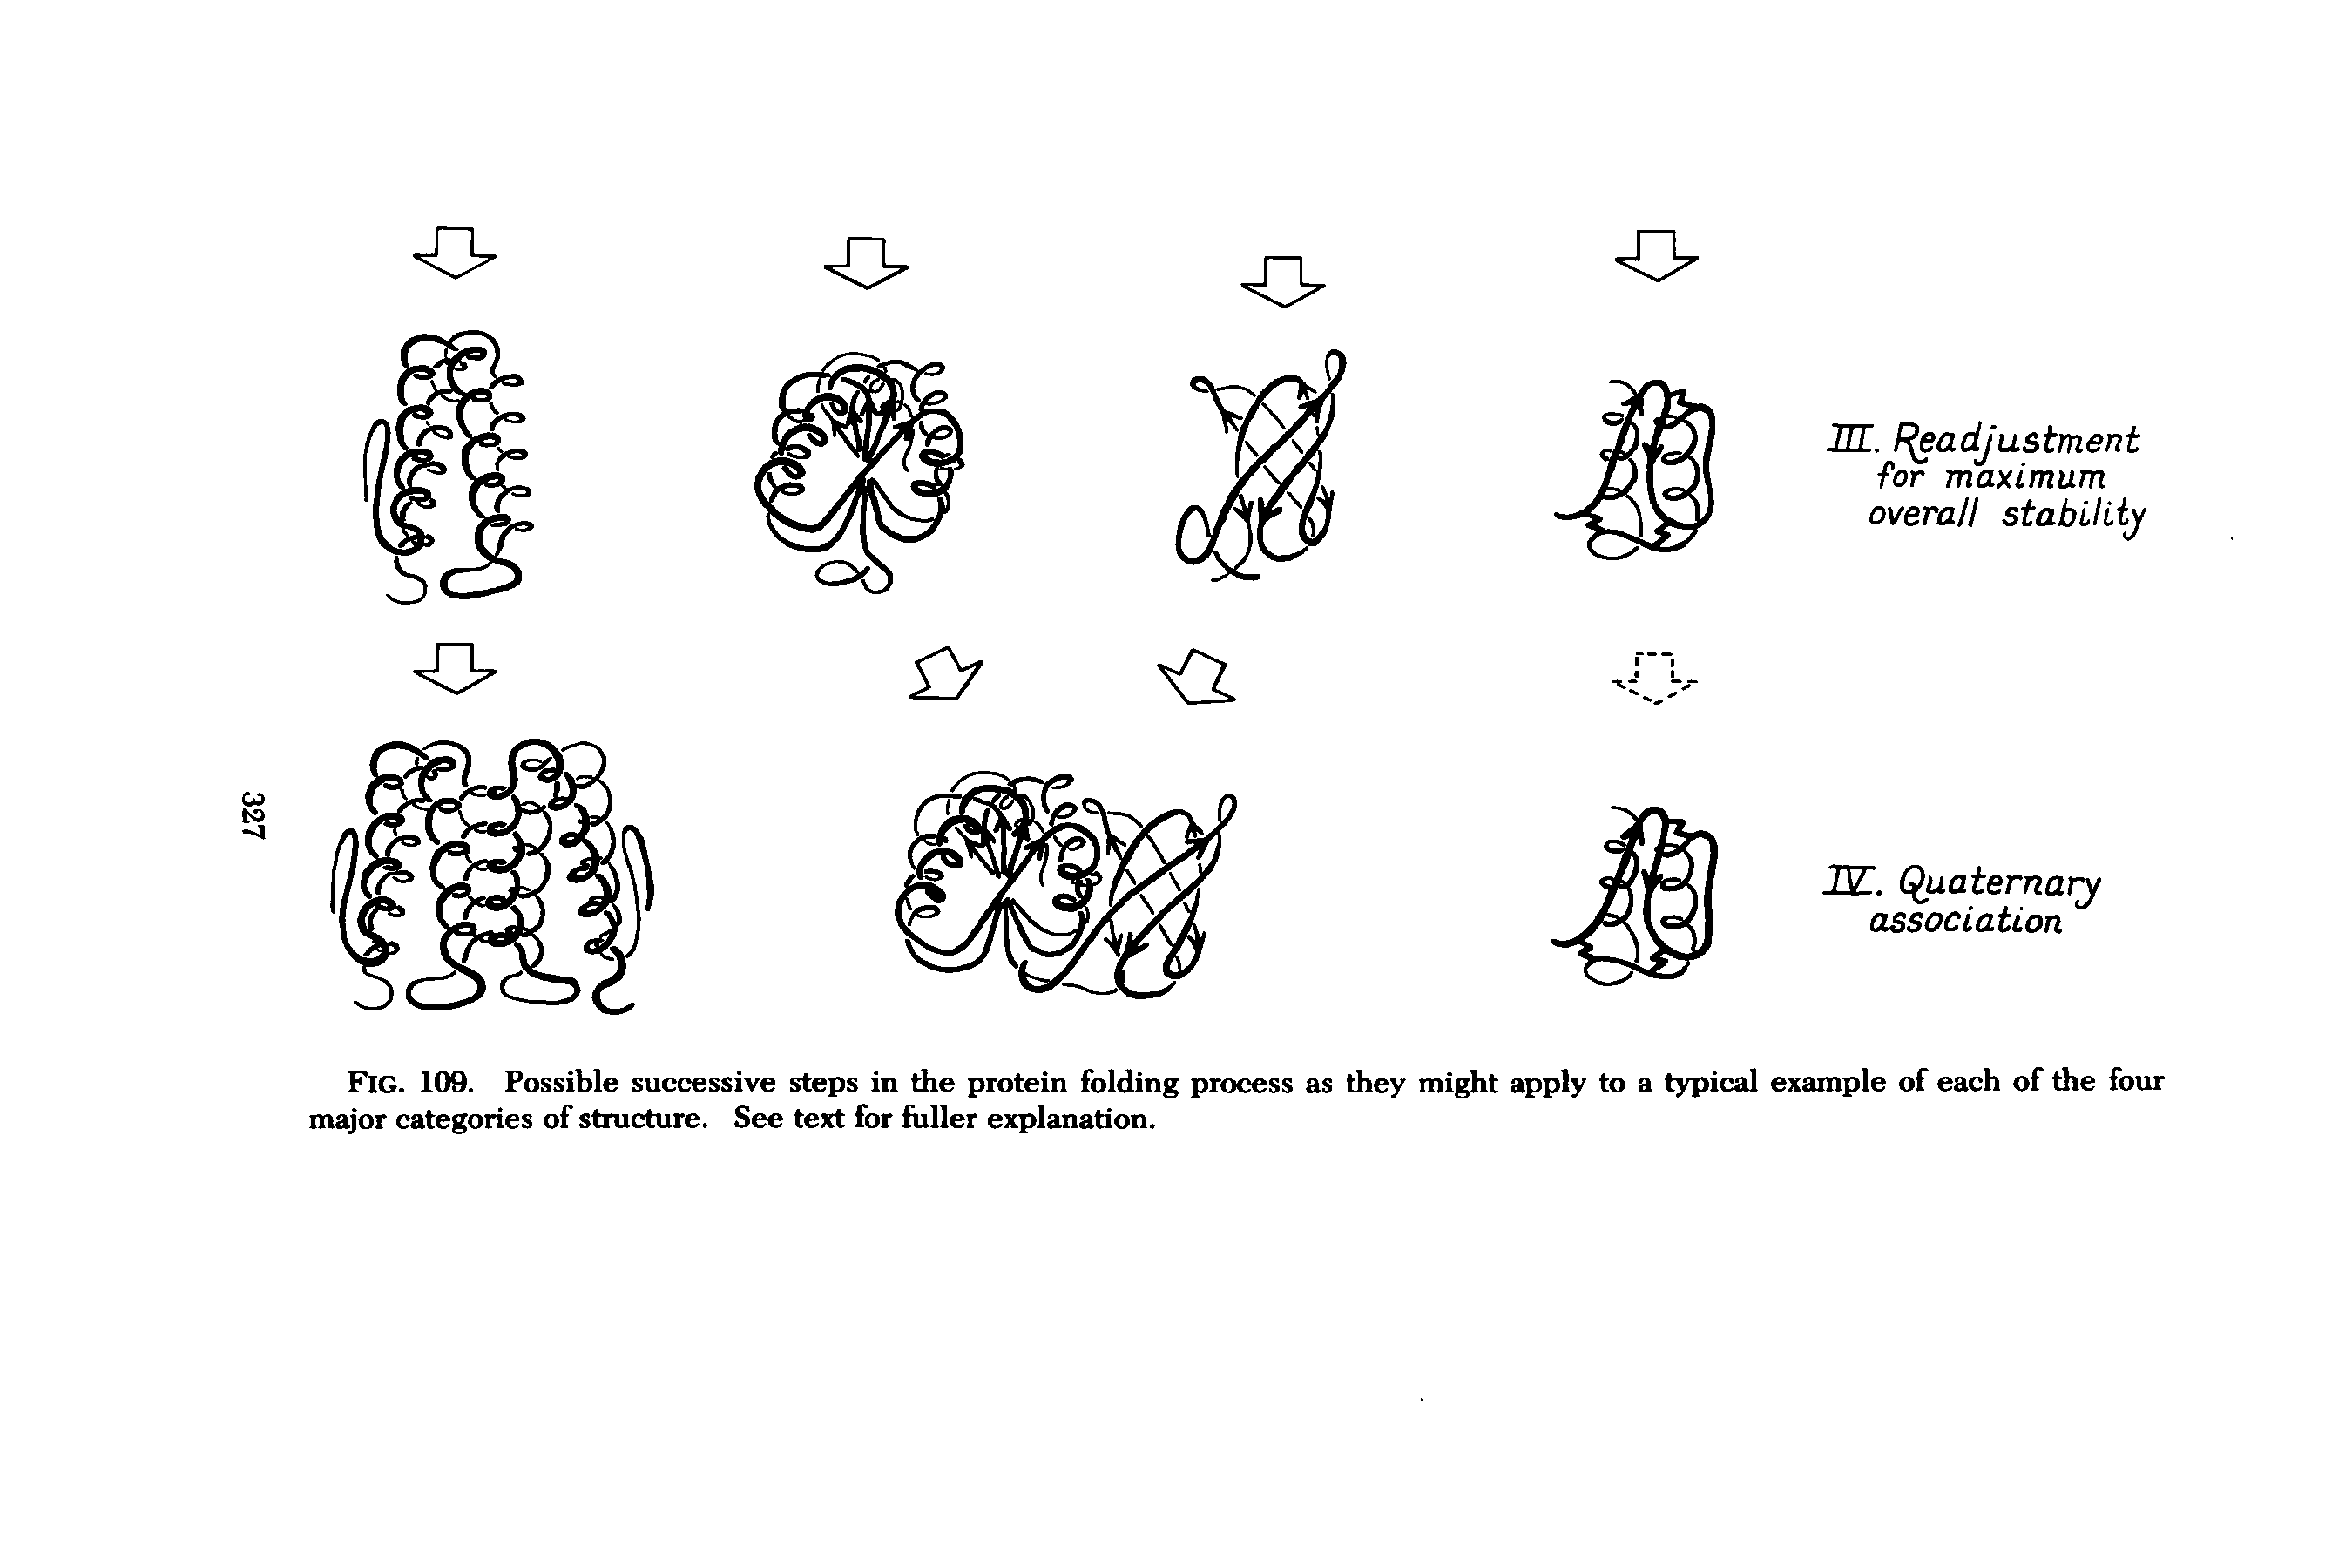 Fig. 109. Possible successive steps in the protein folding process as they might apply to a typical example of each of the four major categories of structure. See text for fuller explanation.